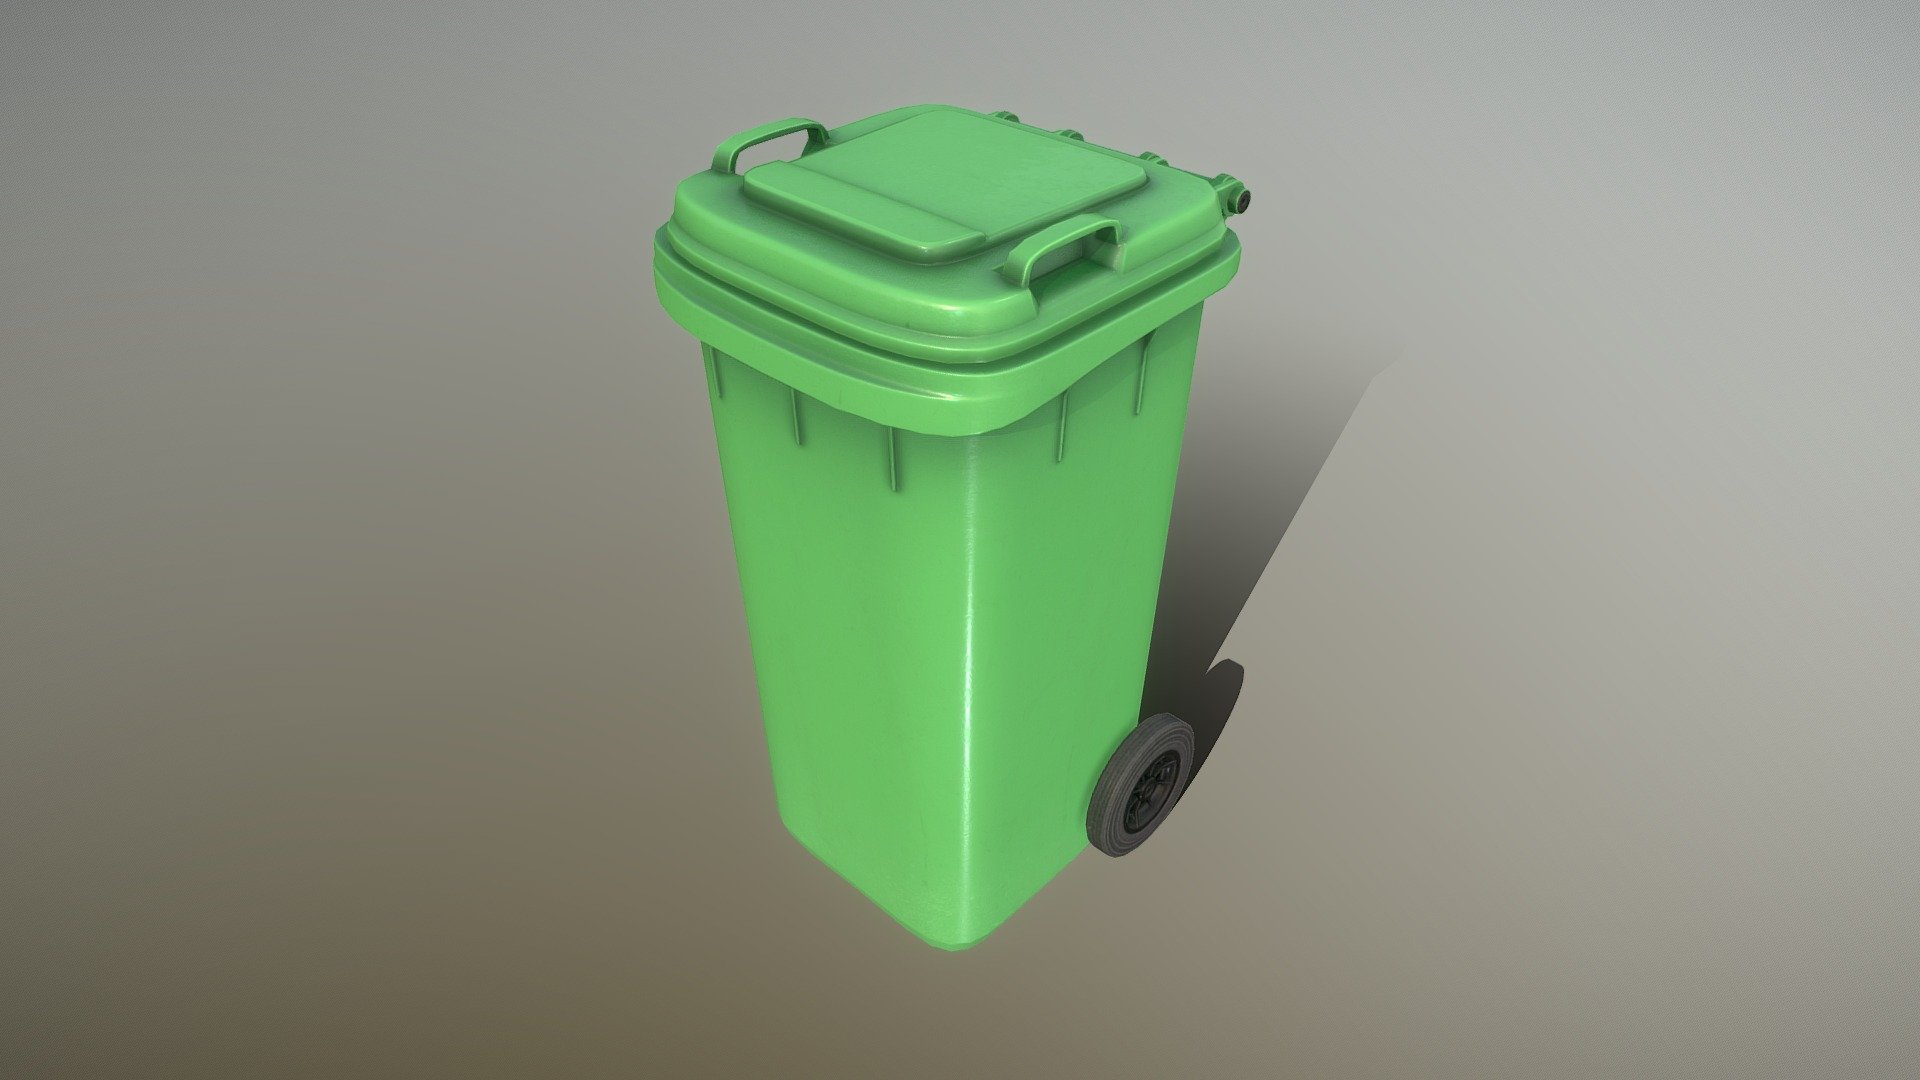 Here is the rigged and animated low-poly version of the organic waste bin (compost bin) with a capacity of 120 liters.


Rigged Organic Waste Bin 120L (Low-Poly-Version)
Yellow Bin 120L Rigged (Low-Poly-Version)
Residual Waste Can 120L (Low-Poly)
Waste Paper Garbage Can 120L Low-Poly
Wheeled-Garbage-Can 120L High-Poly Total triangles 684.2k  


Looking for some other trash cans?


https://sketchfab.com/VIS-All/collections/trashcans-mulleimer


3d-modeled and animated by 3DHaupt in Blender-2.83.3 - Green Recycle Waste Bin 120L Rigged (Low-Poly) - Buy Royalty Free 3D model by VIS-All-3D (@VIS-All) 3d model